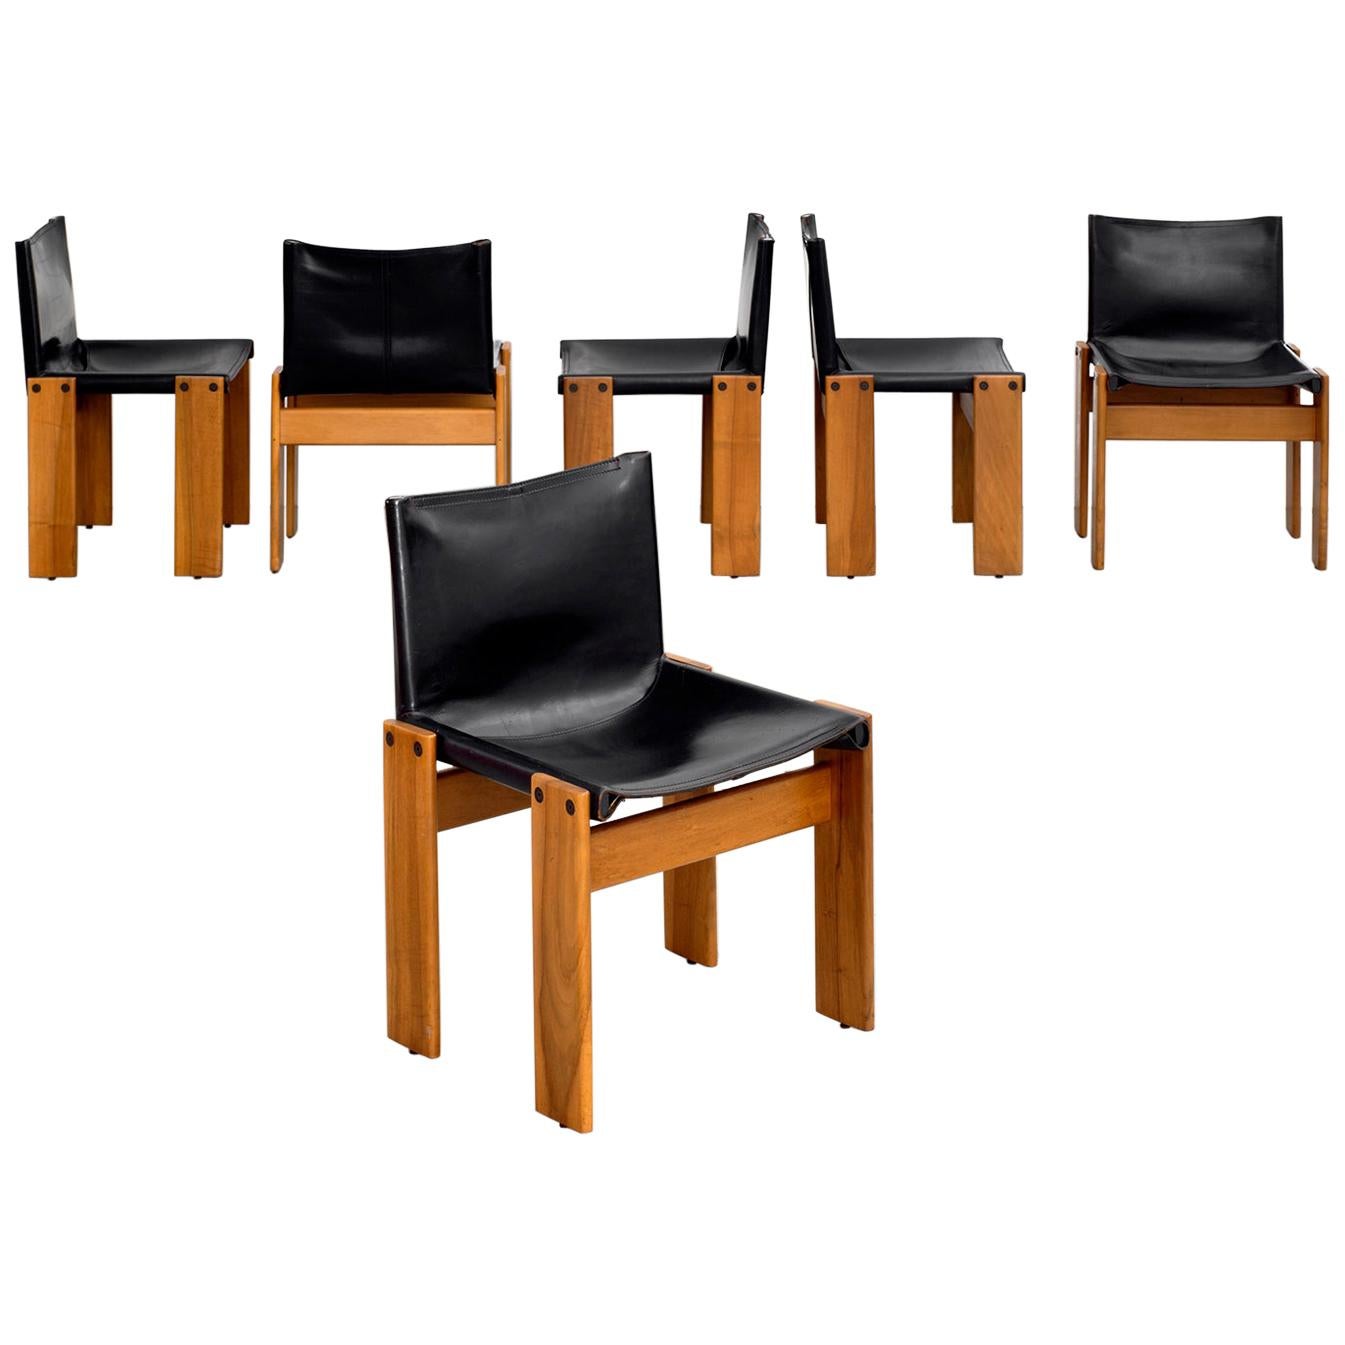 Afra & Tobia Scarpa "Monk" Chairs, Set of 6